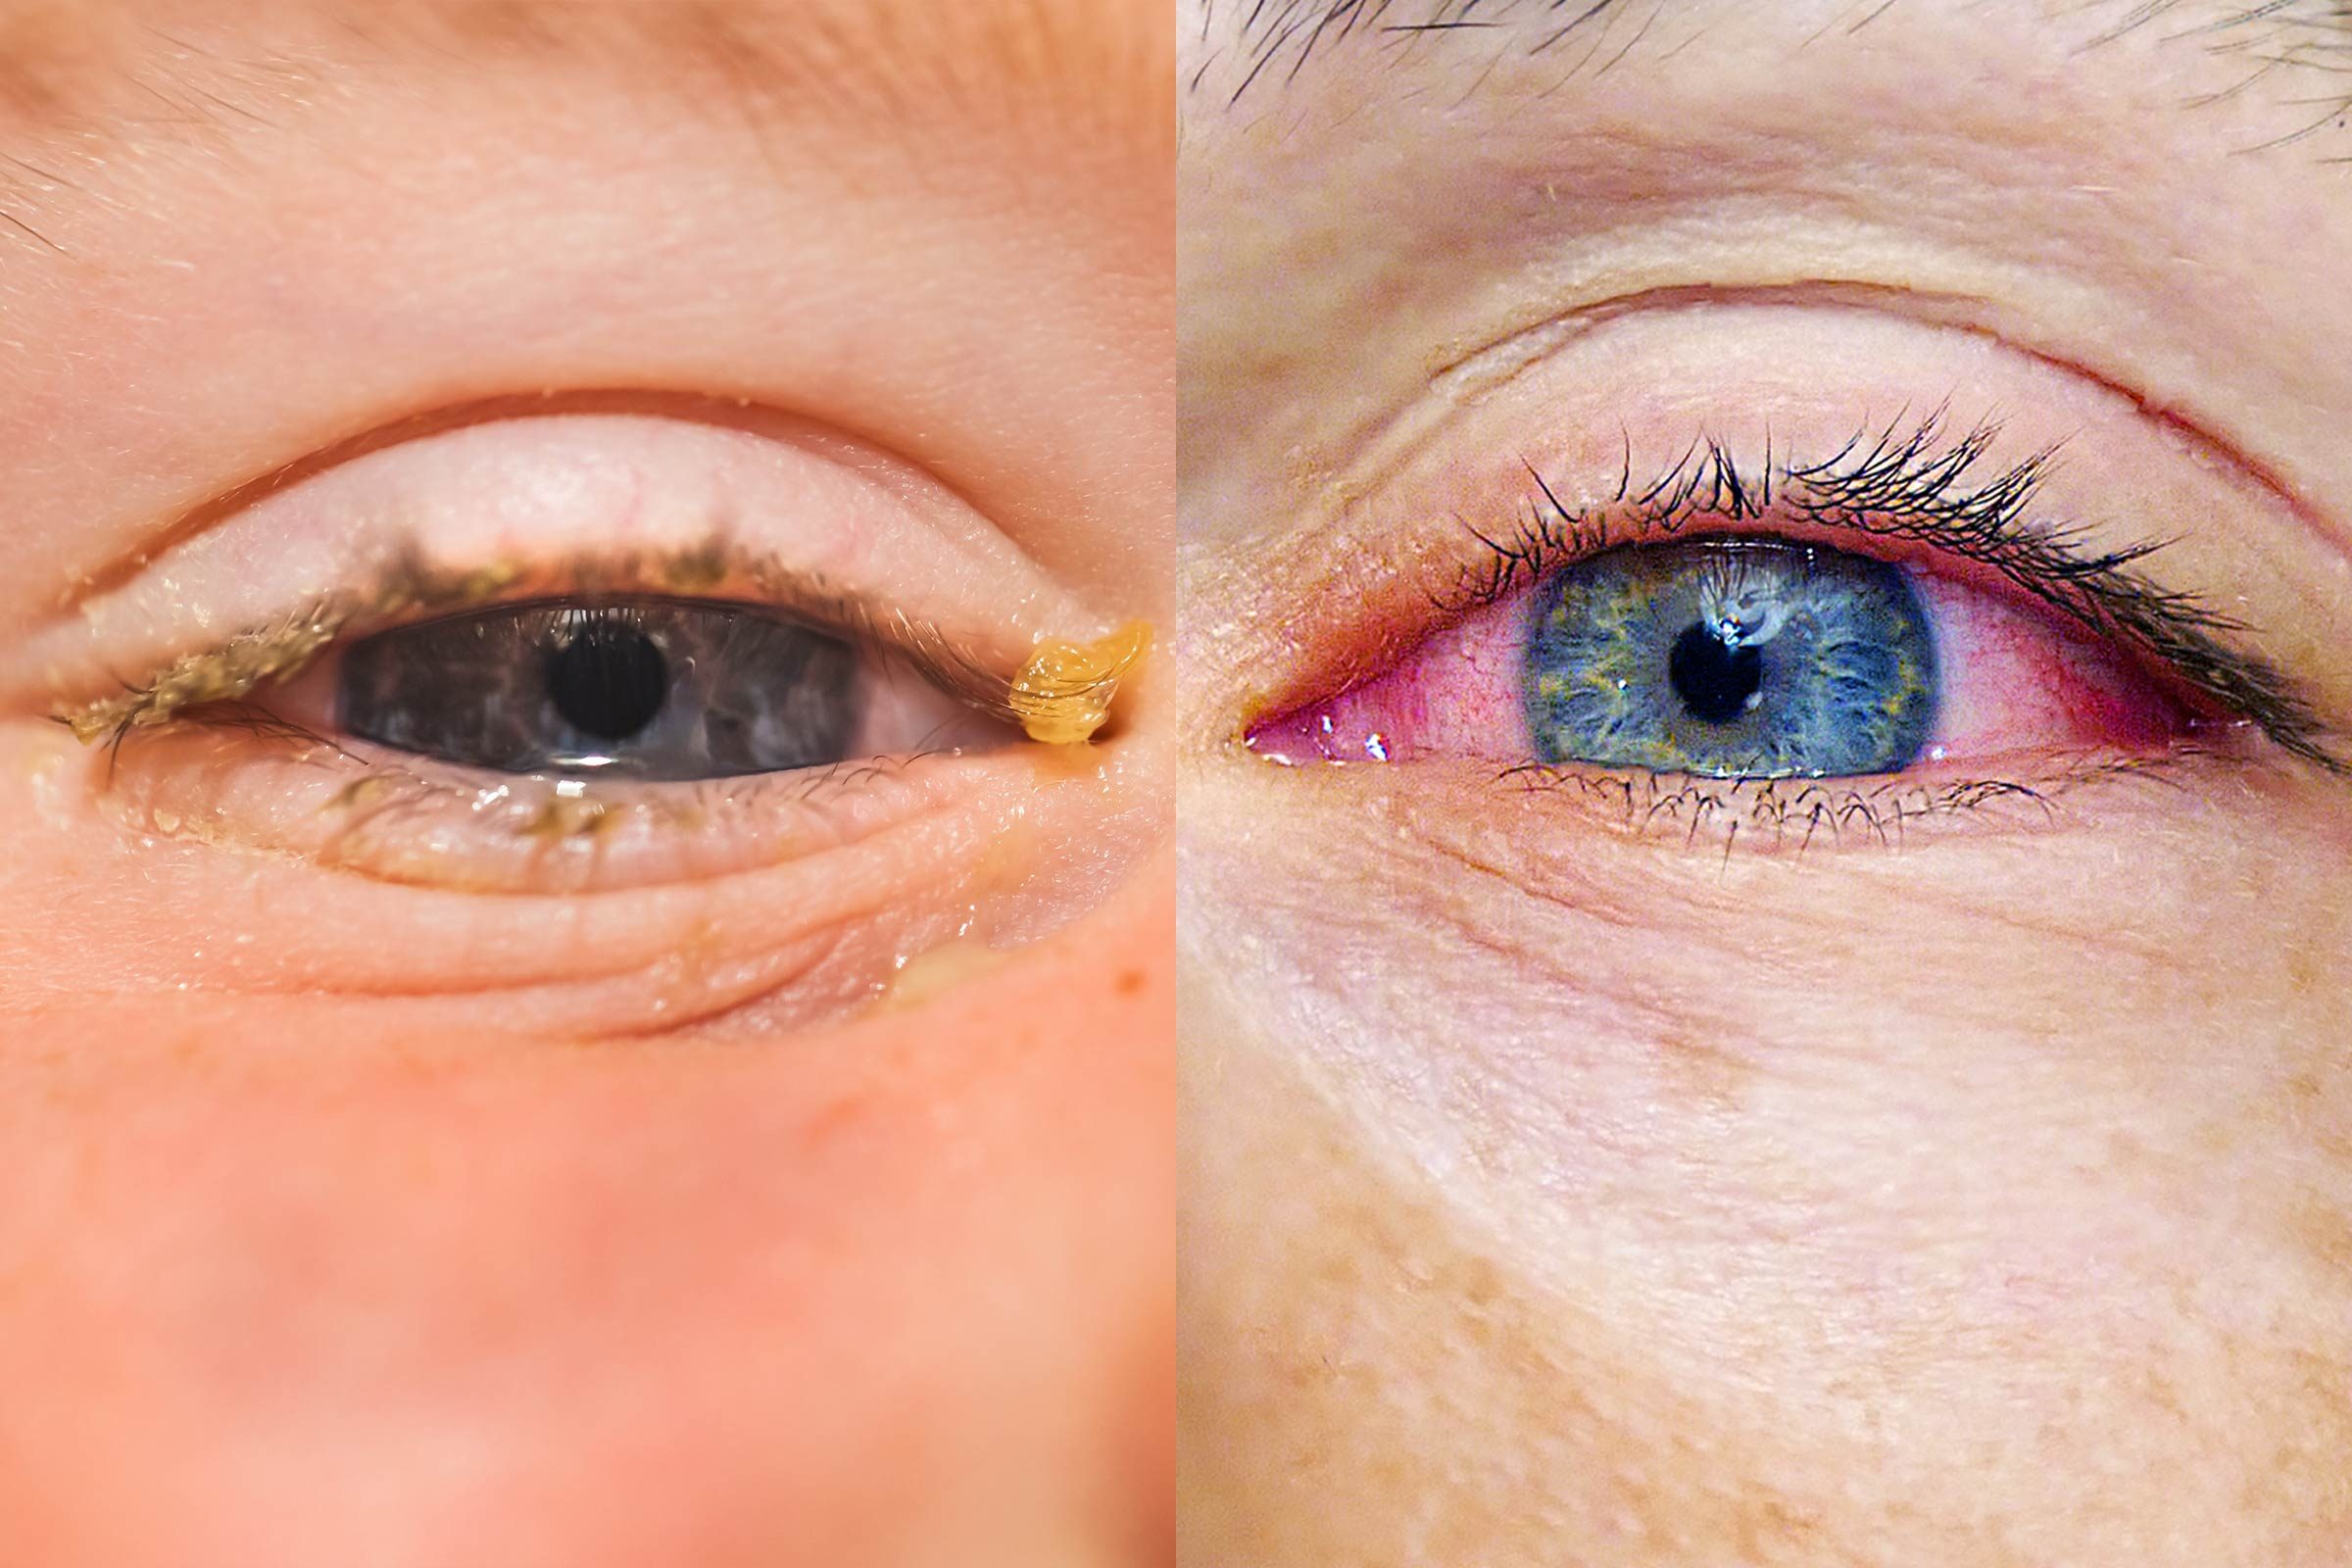 Allergies or Pink Eye: Here's How to Tell the Difference | Reader's Digest